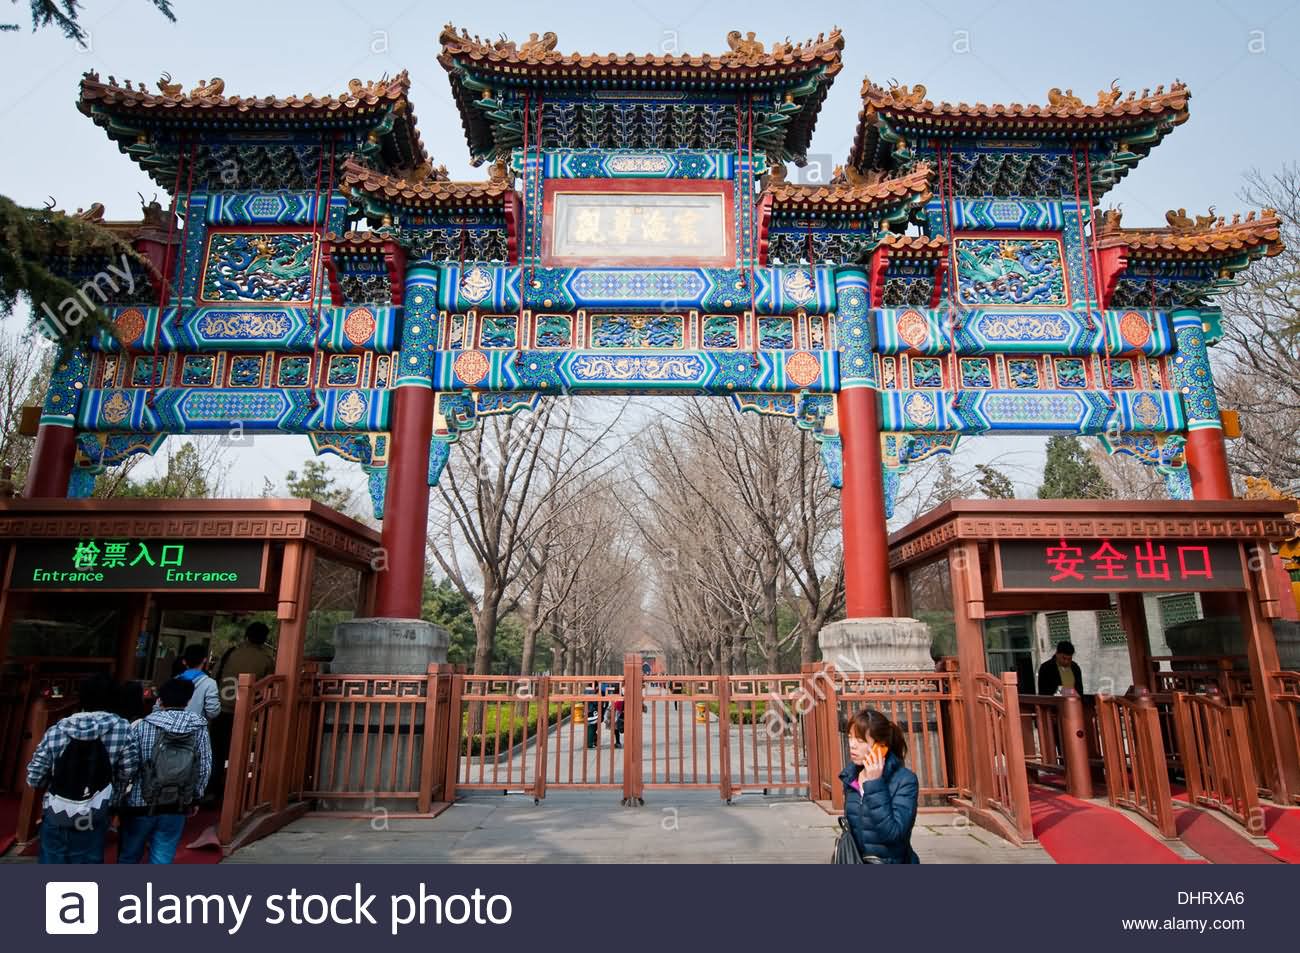 Traditional Archway Main Entrance Of The Yonghe Temple, Beijing